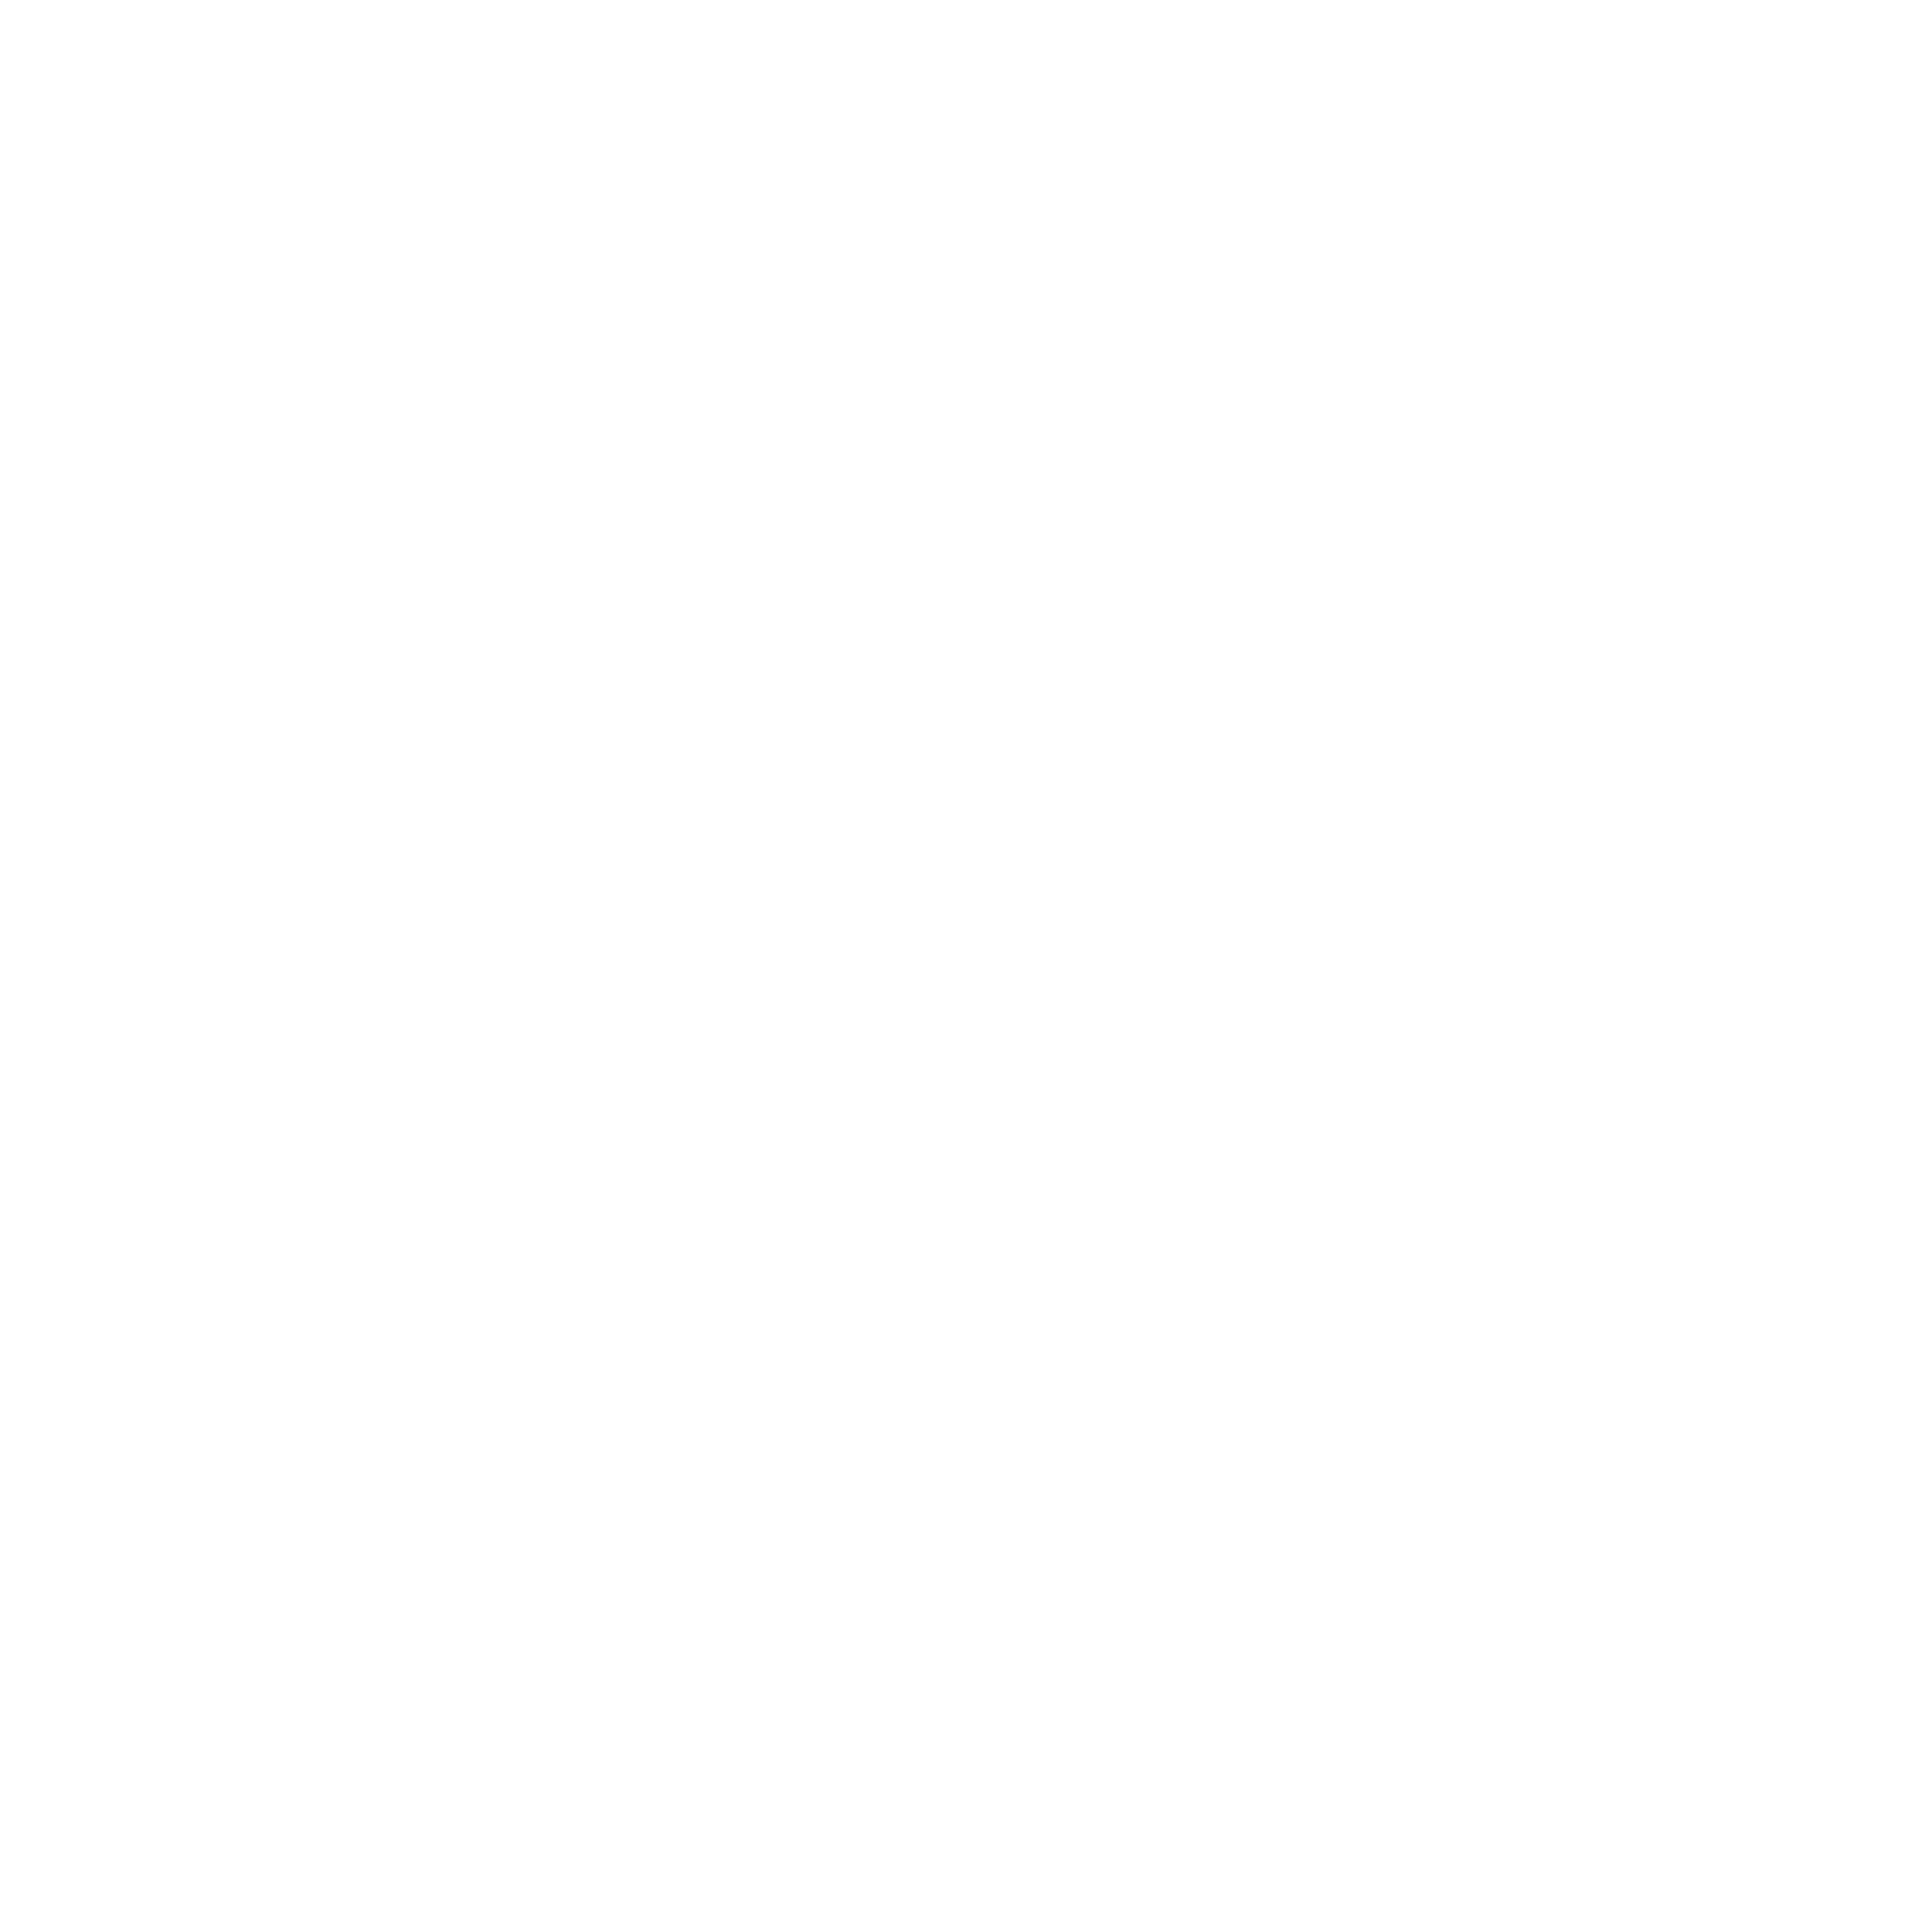 syspro partner up logo in white